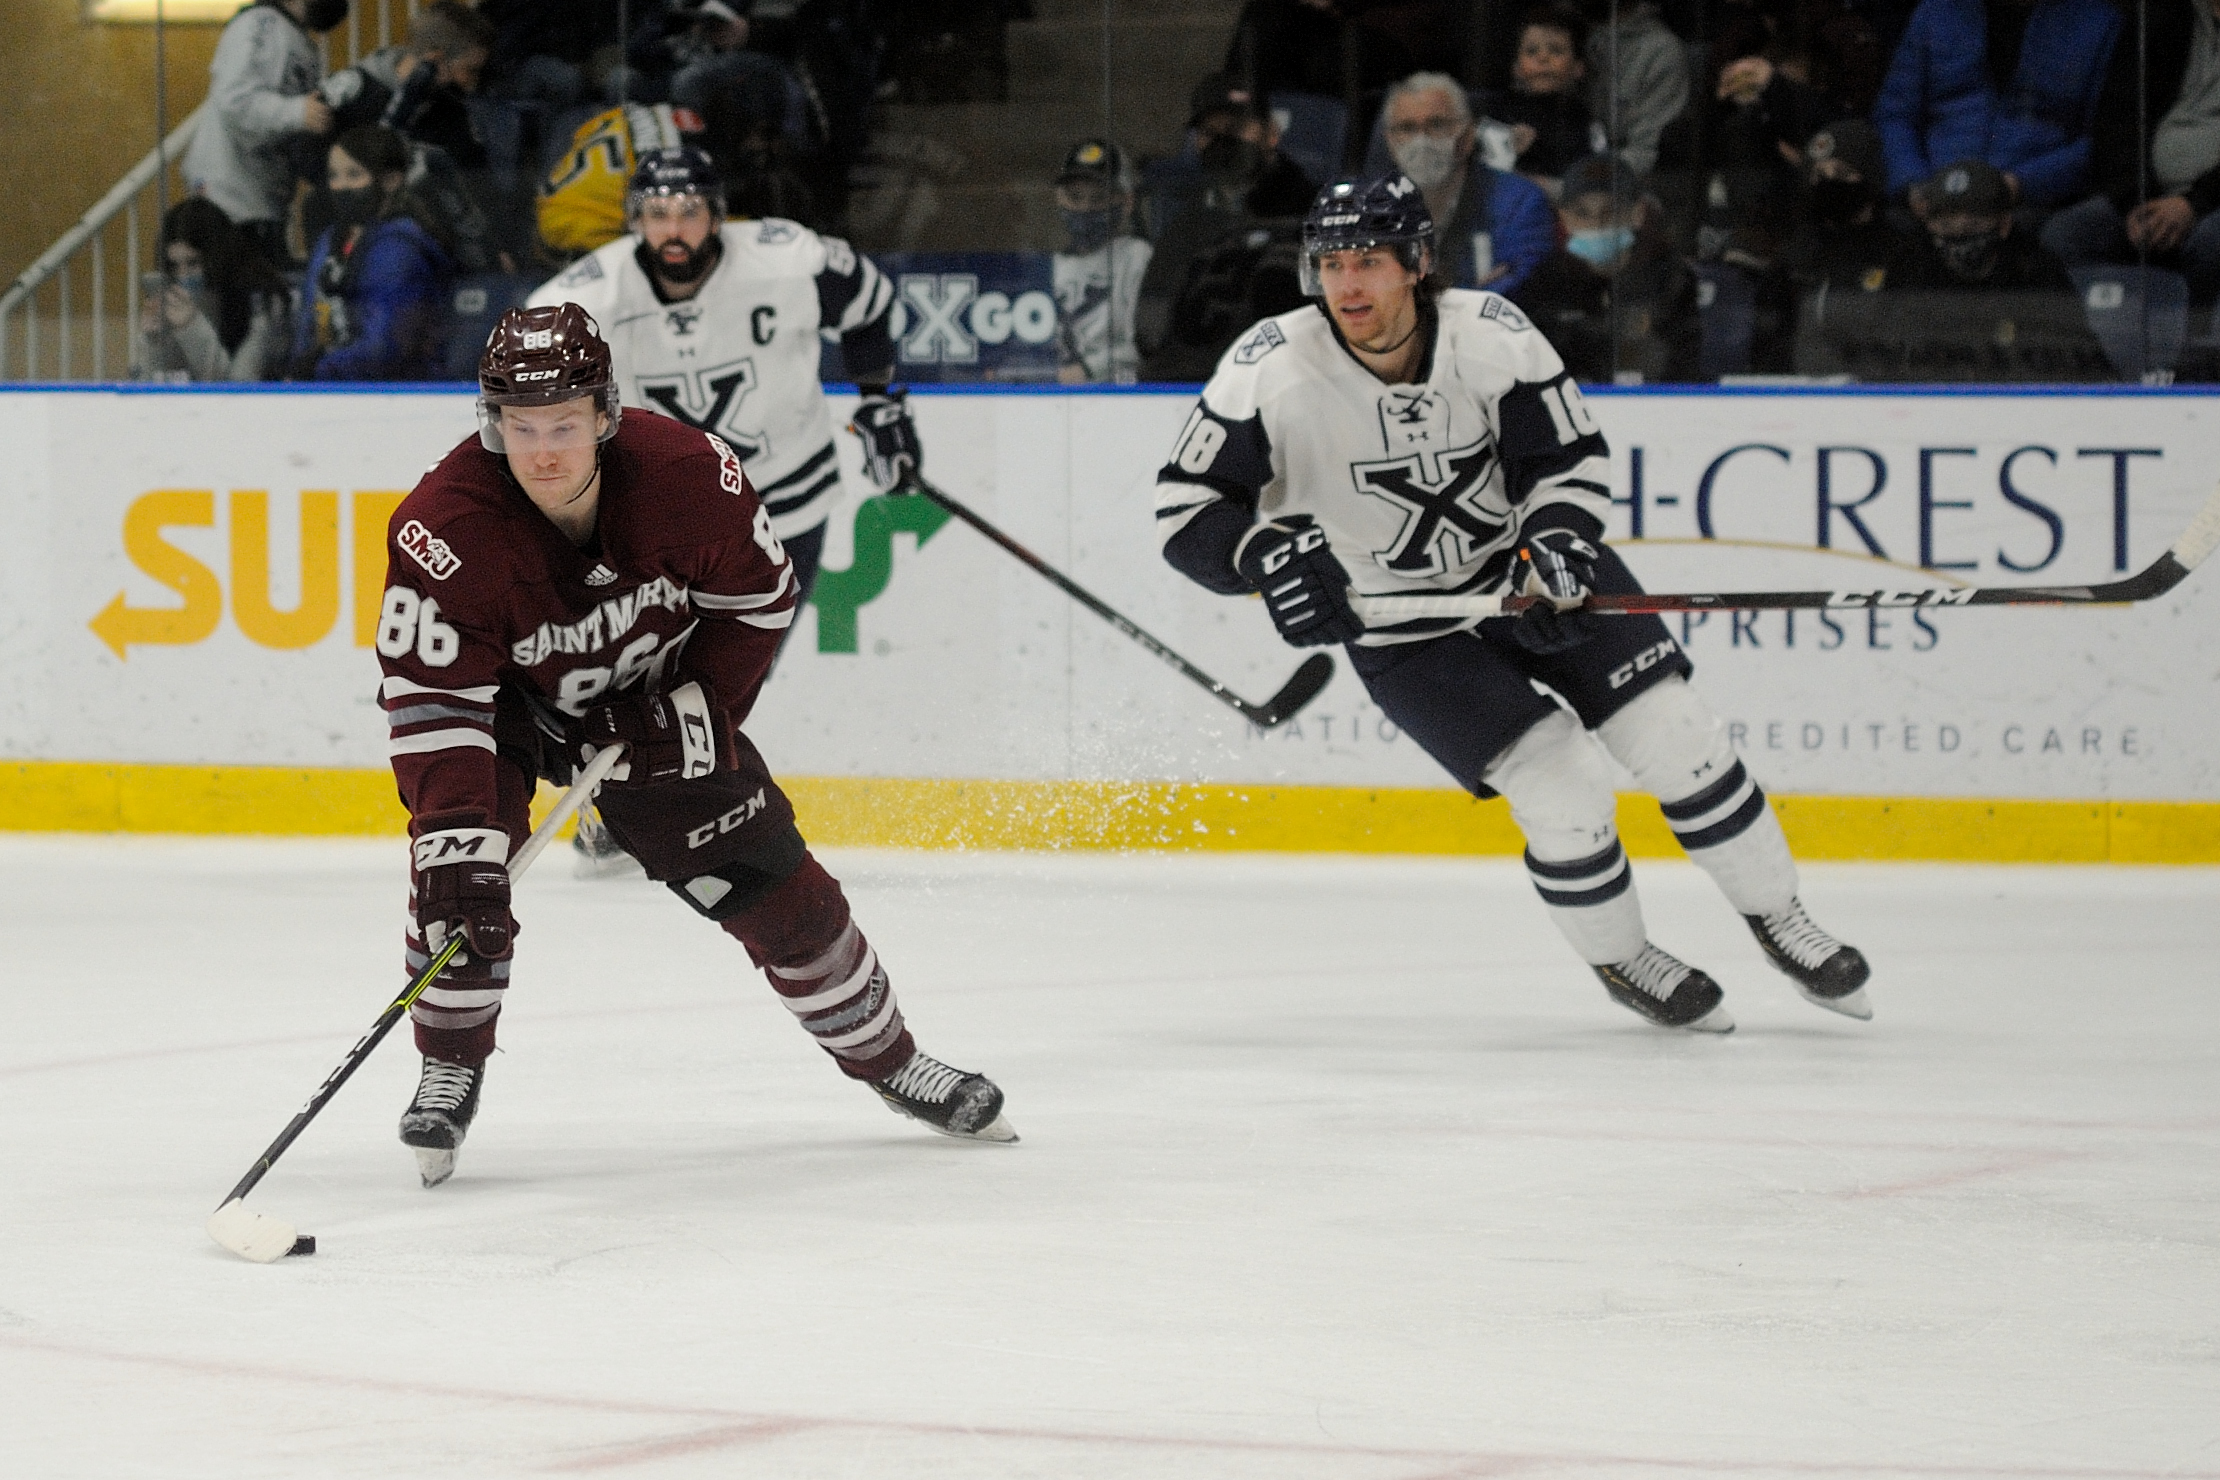 Huskies forward Bradey Johnson controls the puck in game one of the AUS semi-final. The St. FX X-Men defeated the Huskies 2-1 to take a one game lead in the best-of-three series.